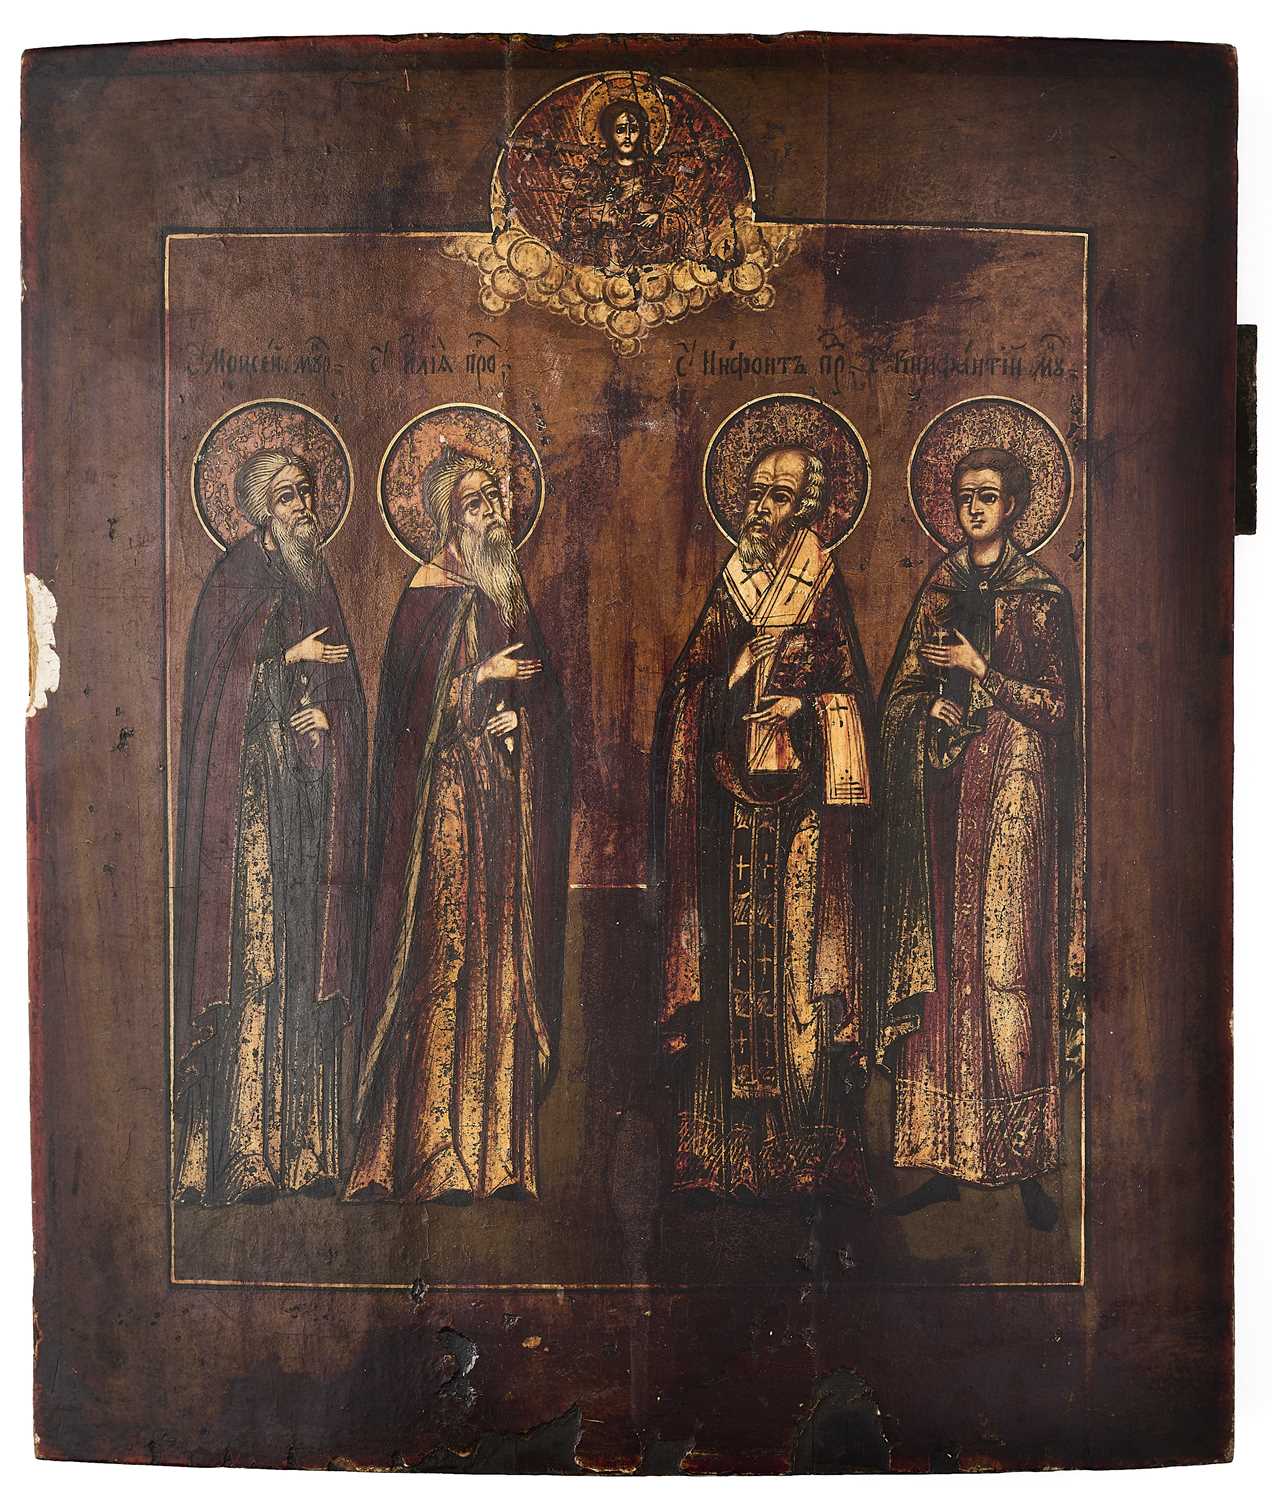 Lot 39 - AN ICON OF MOSES, ELIJAH, SAINT NIPHONT AND SAINT PANTELEIMON, RUSSIAN, LATE 18TH / EARLY 19TH CENTURY